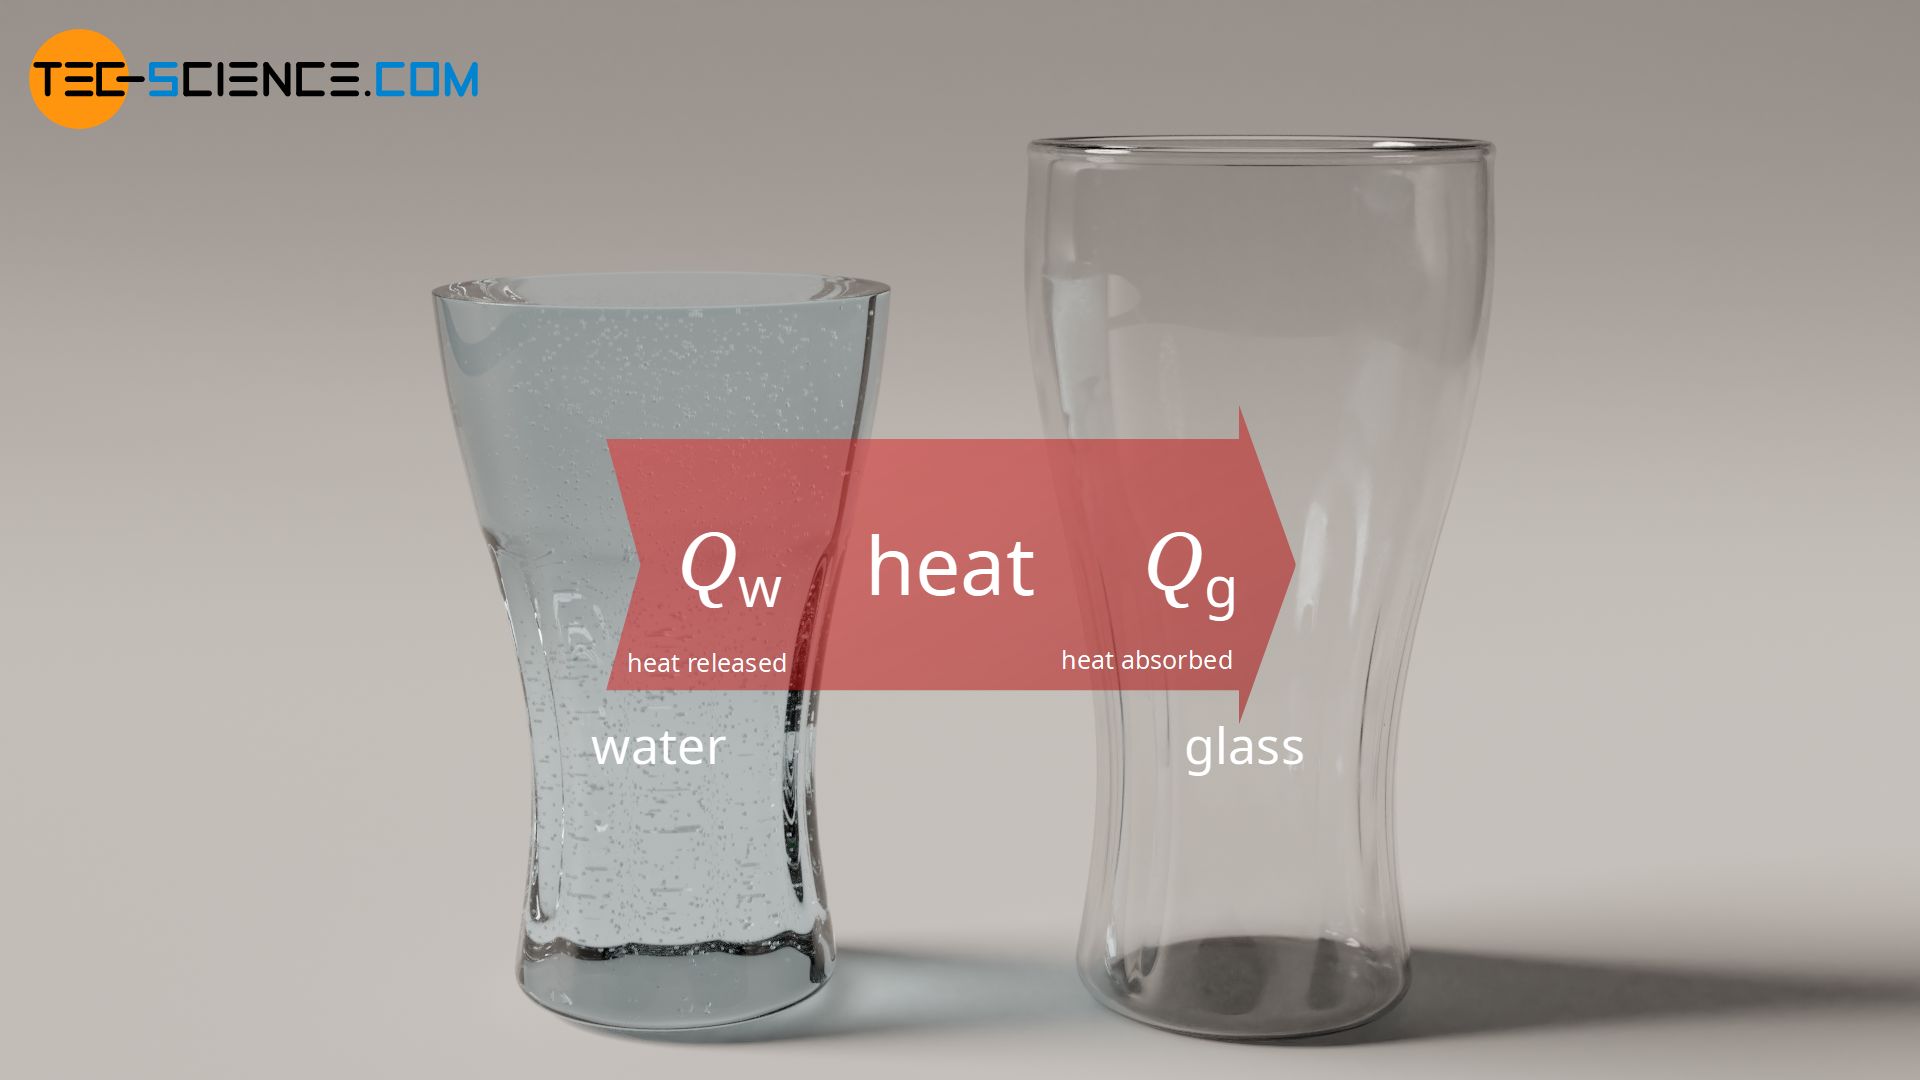 Emitted heat of the water equals the absorbed heat of the glass